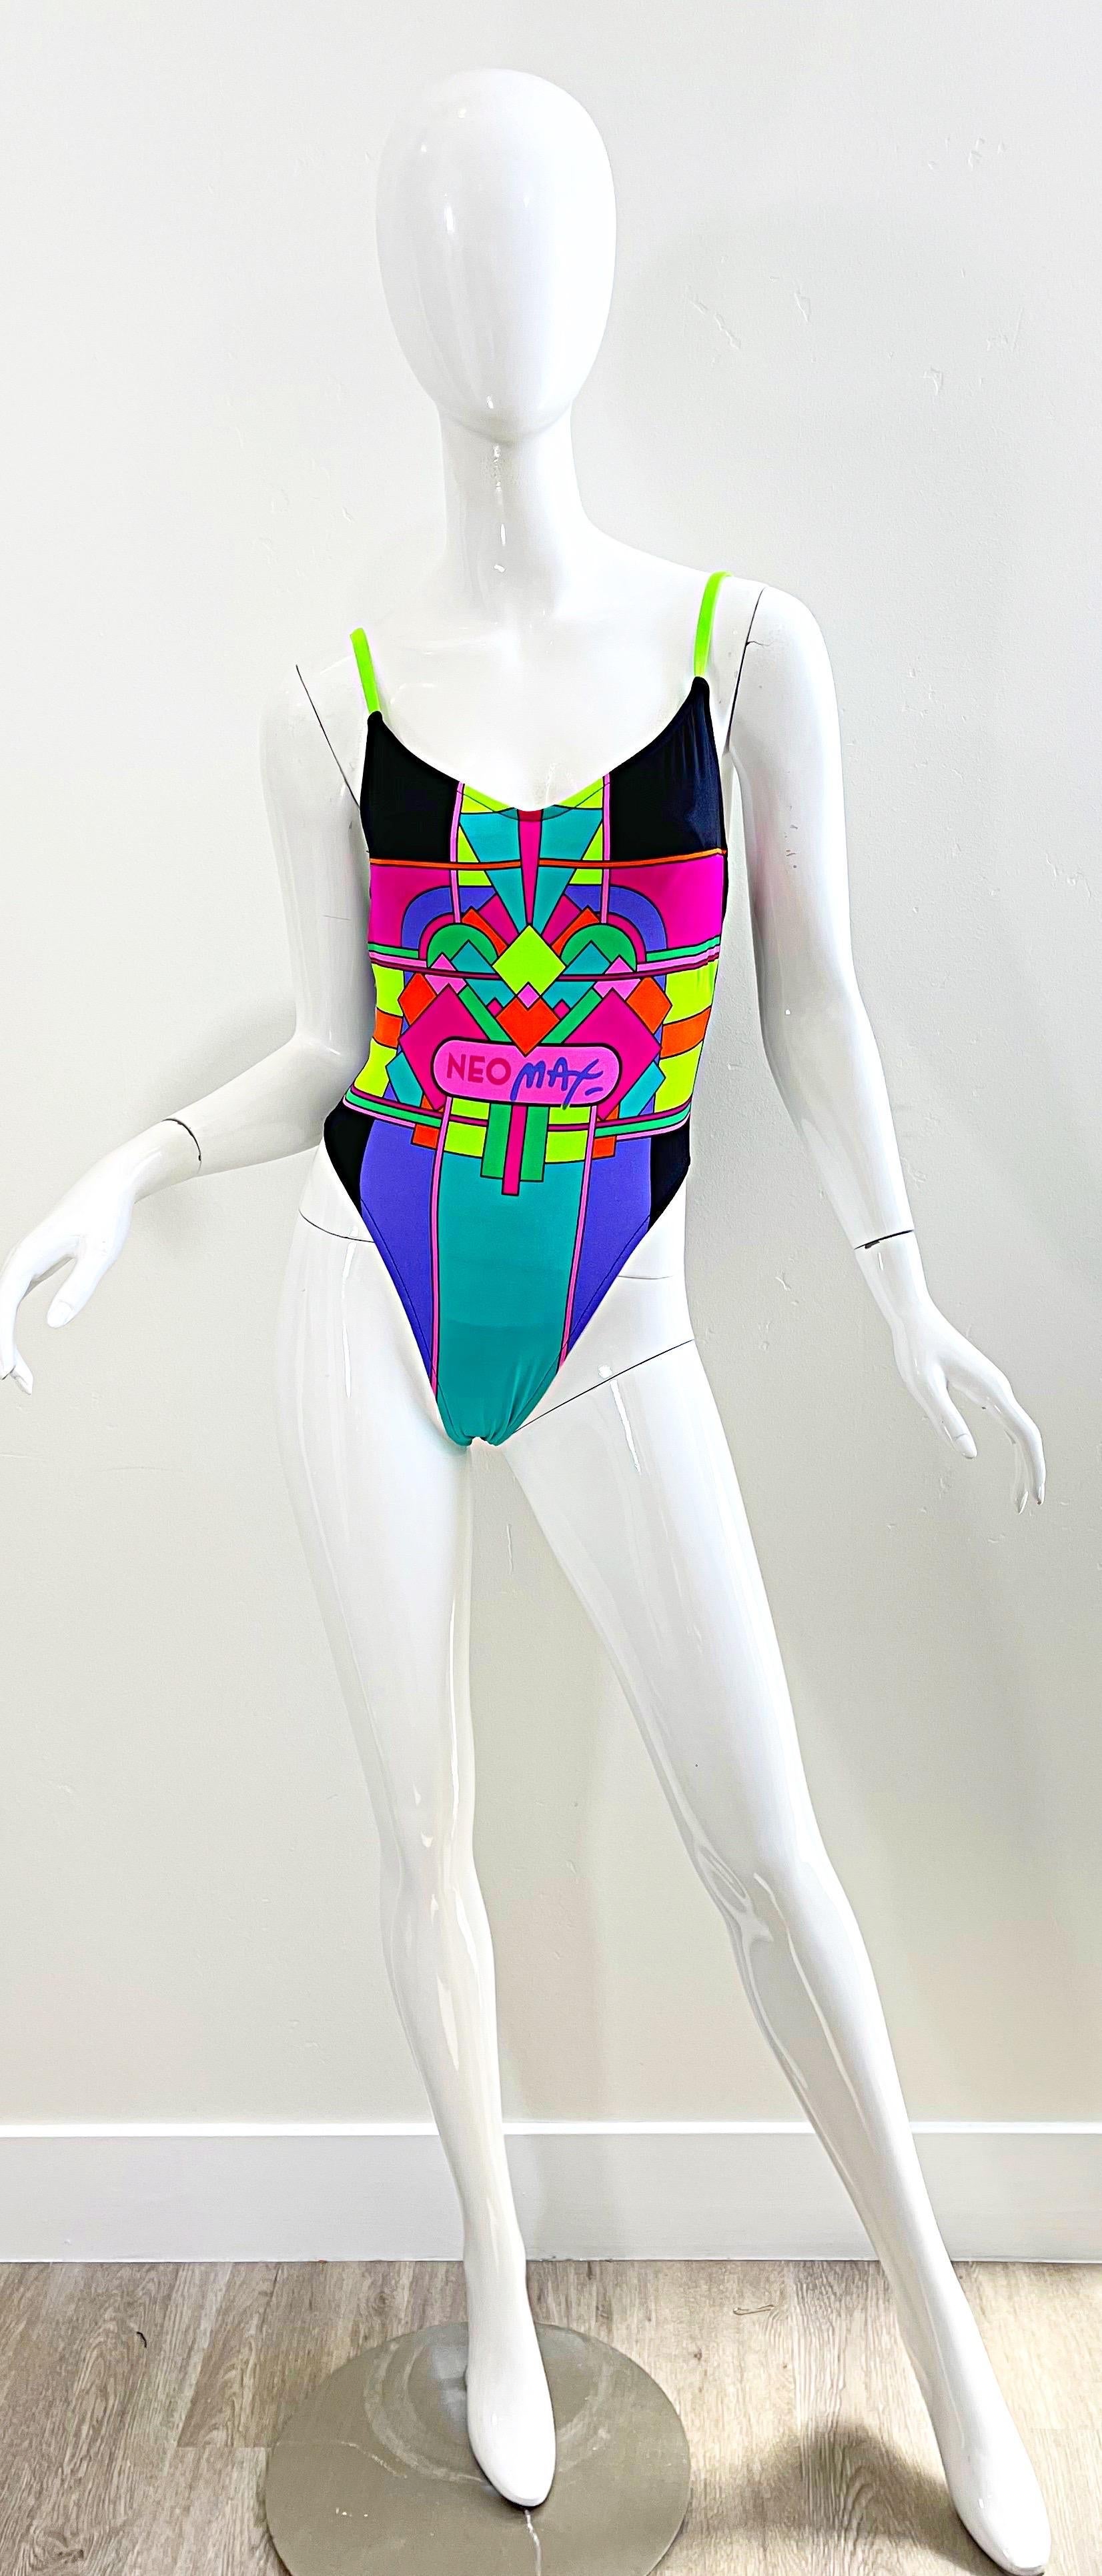 Awesome brand new deadstock 80s PETER MAX Neomax one piece abstract art print neon swimsuit or bodysuit ! Features vibrant neon colors of pink, green, highlighter yellow, turquoise, and purple throughout. Sexy plunging back. Simply slips over the